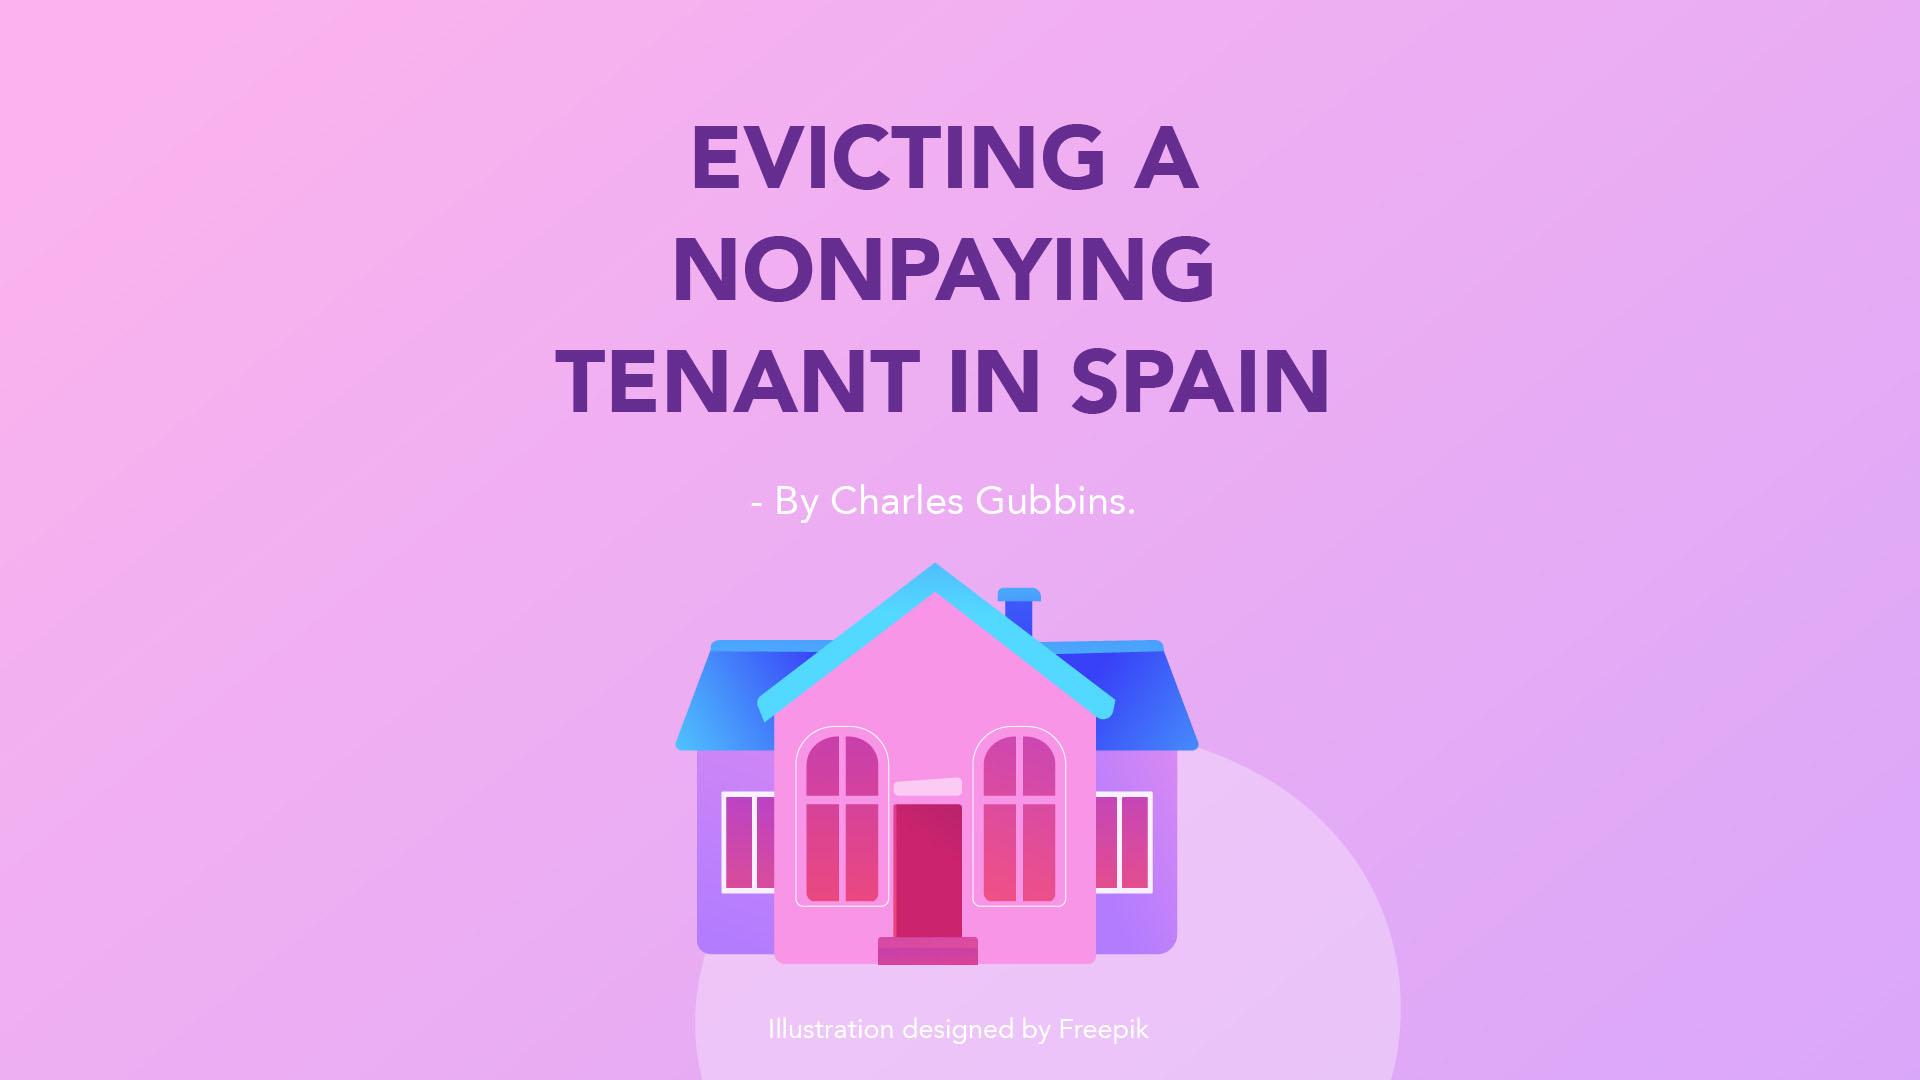 Evicting a nonpaying tenant in Sotogrande Spain - By Charles Gubbins - Designed by Freepik